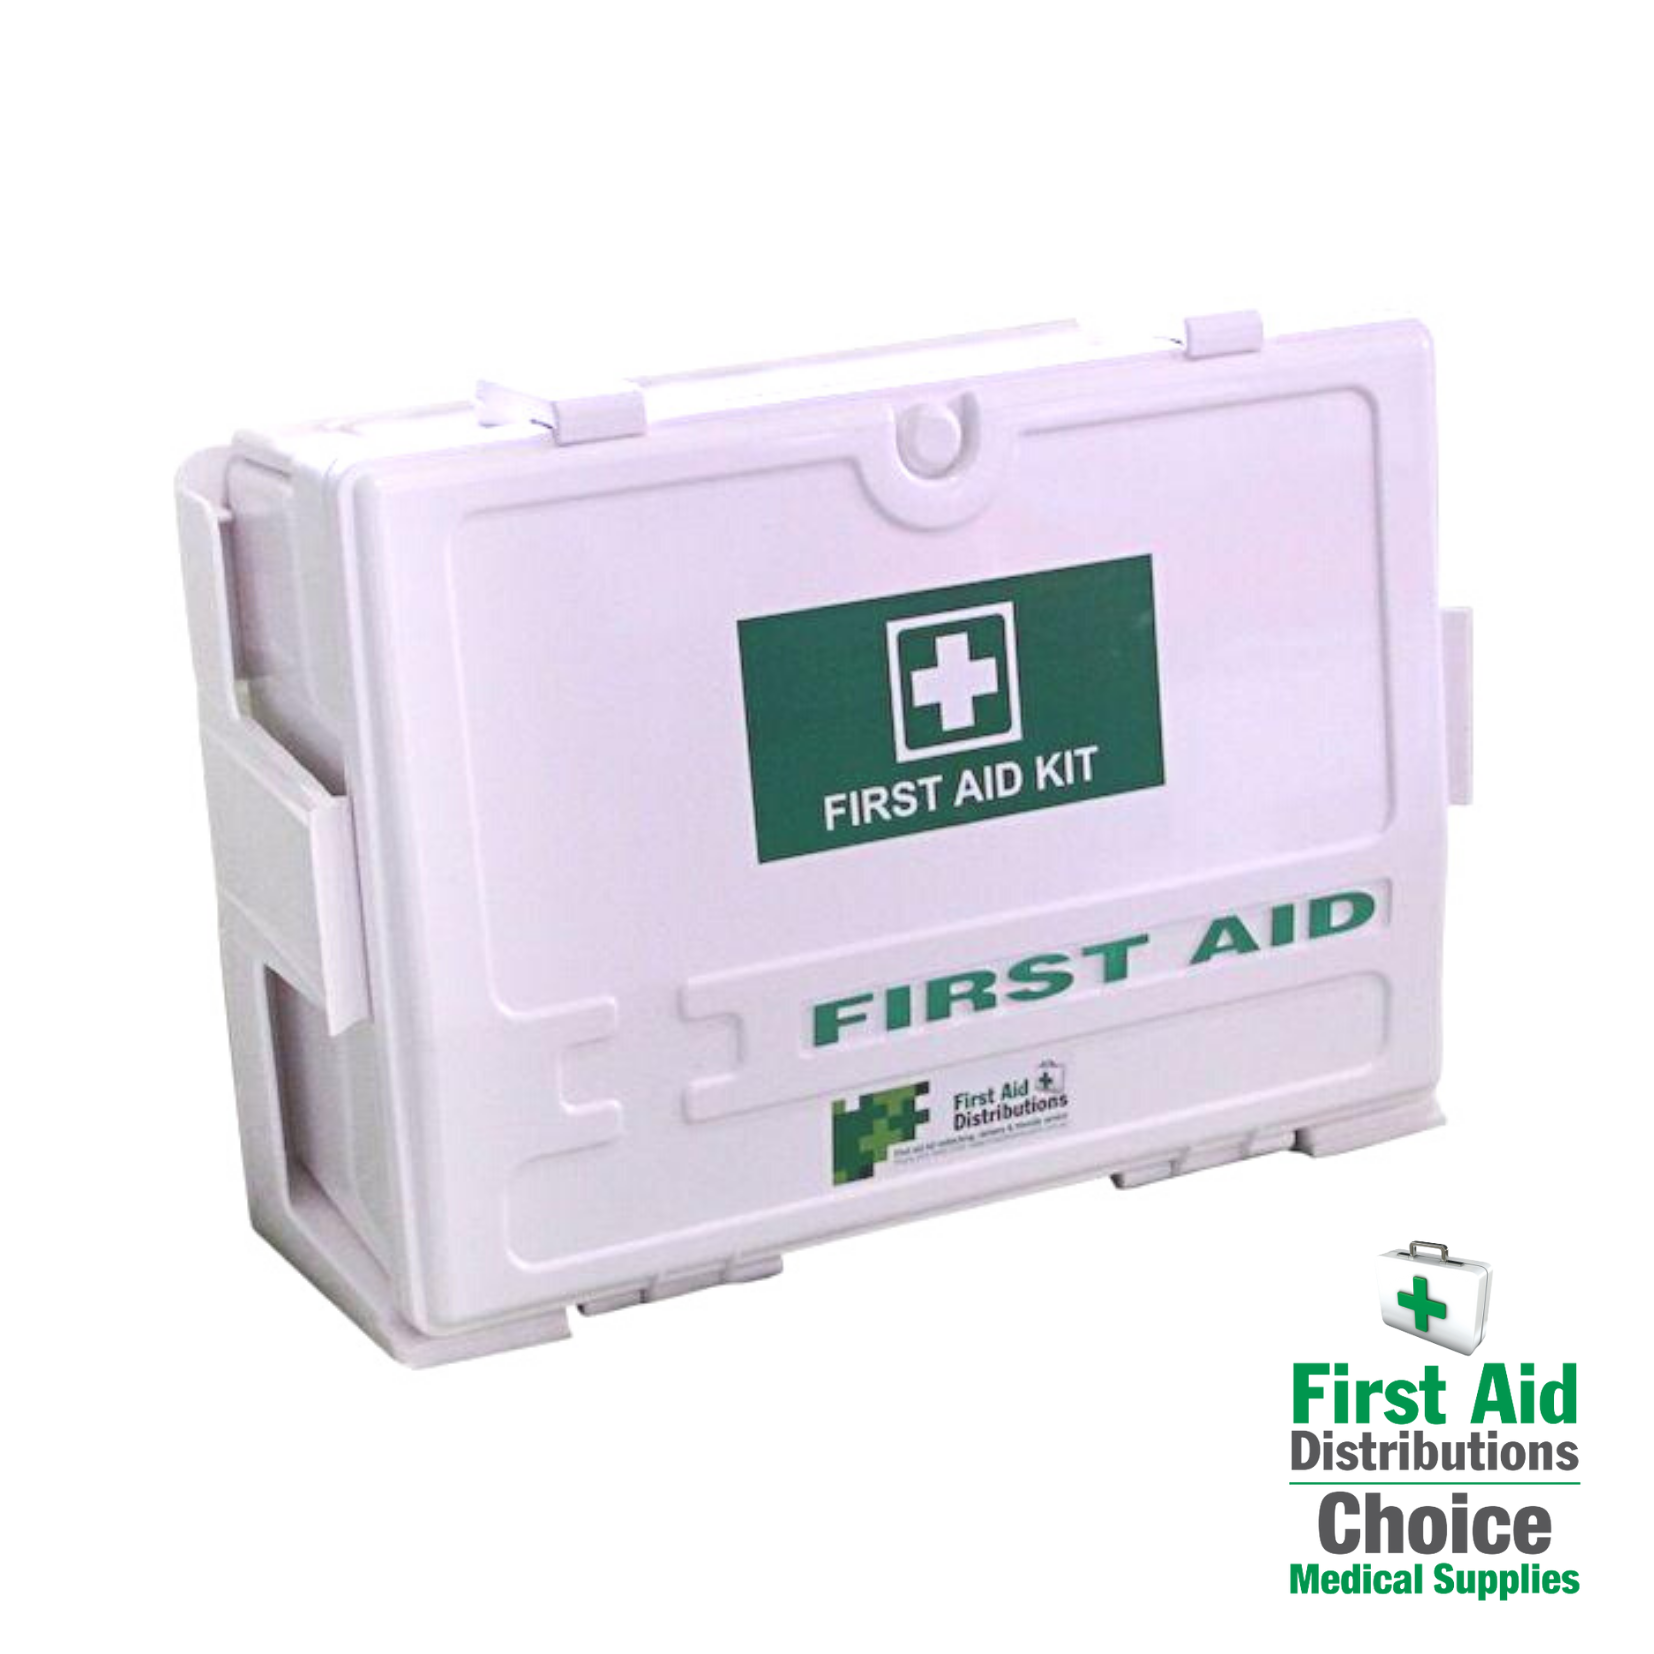 collections/Water_Proof_White_Box_3_First_Aid_Distributions.png